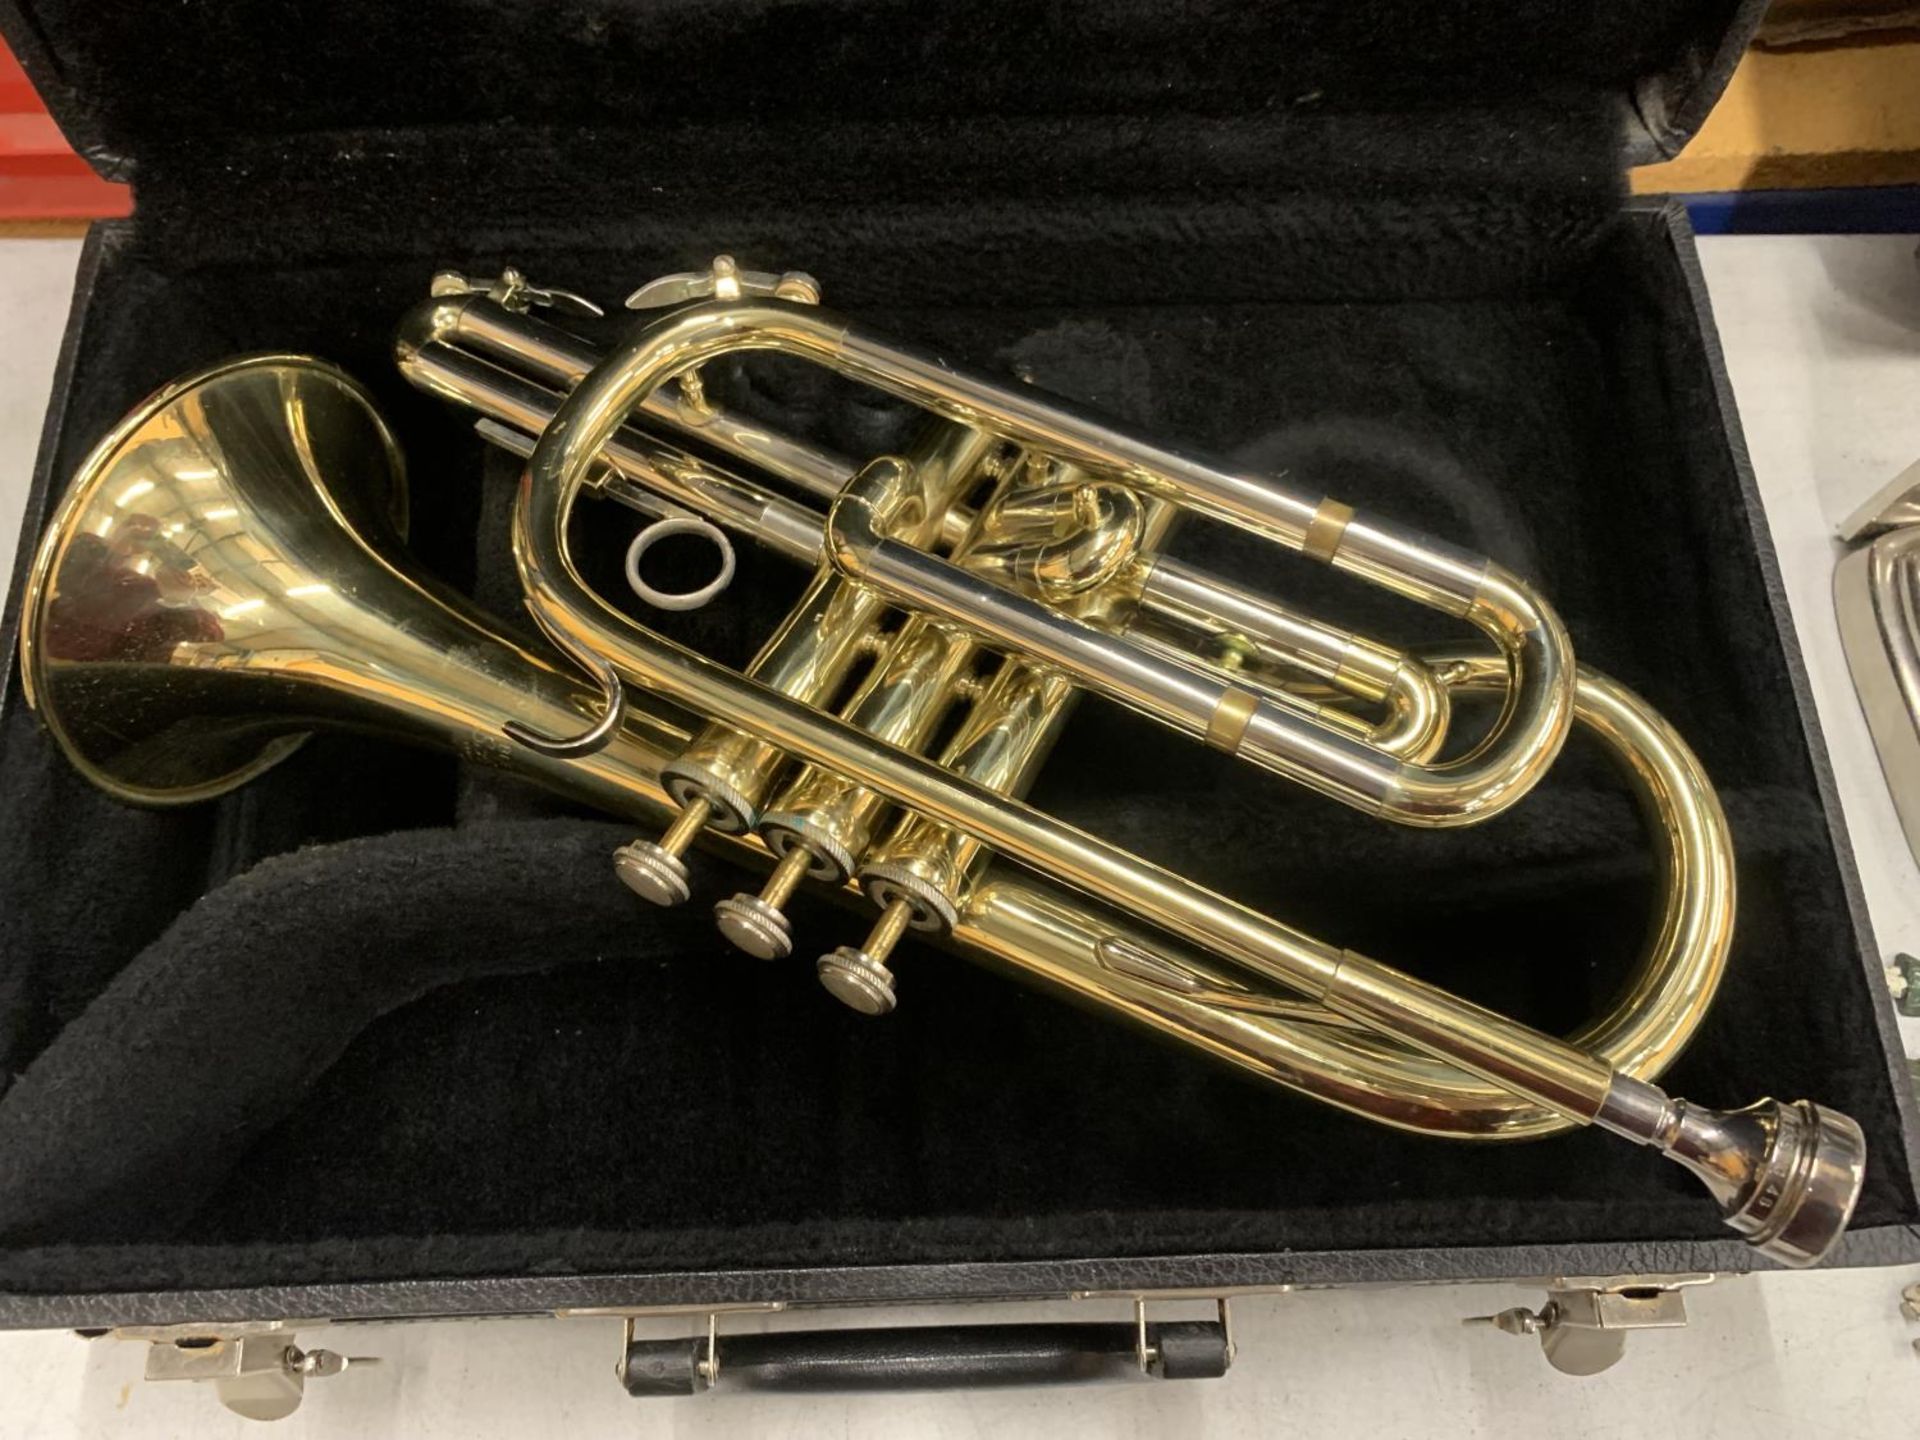 A CASED BLESSING, U.S.A SCHOLASTIC TRUMPET - Image 4 of 8